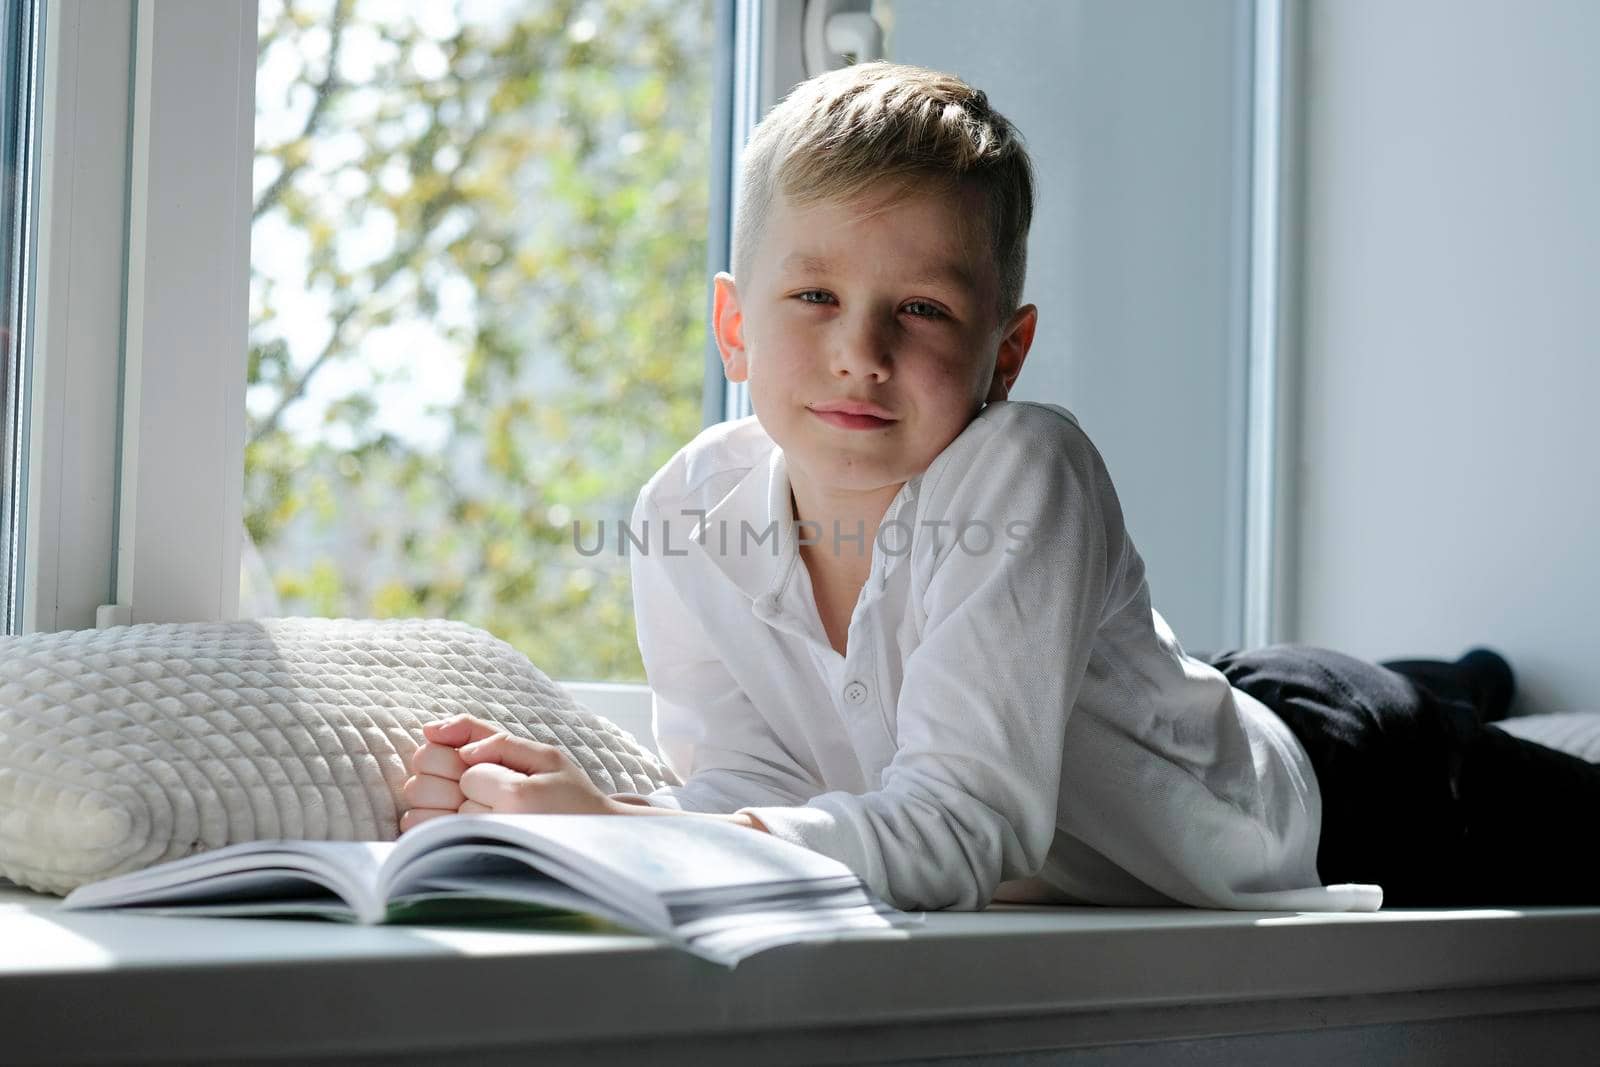 Cute boy reading a book lying on a windowsill in the house enjoying sunny weather